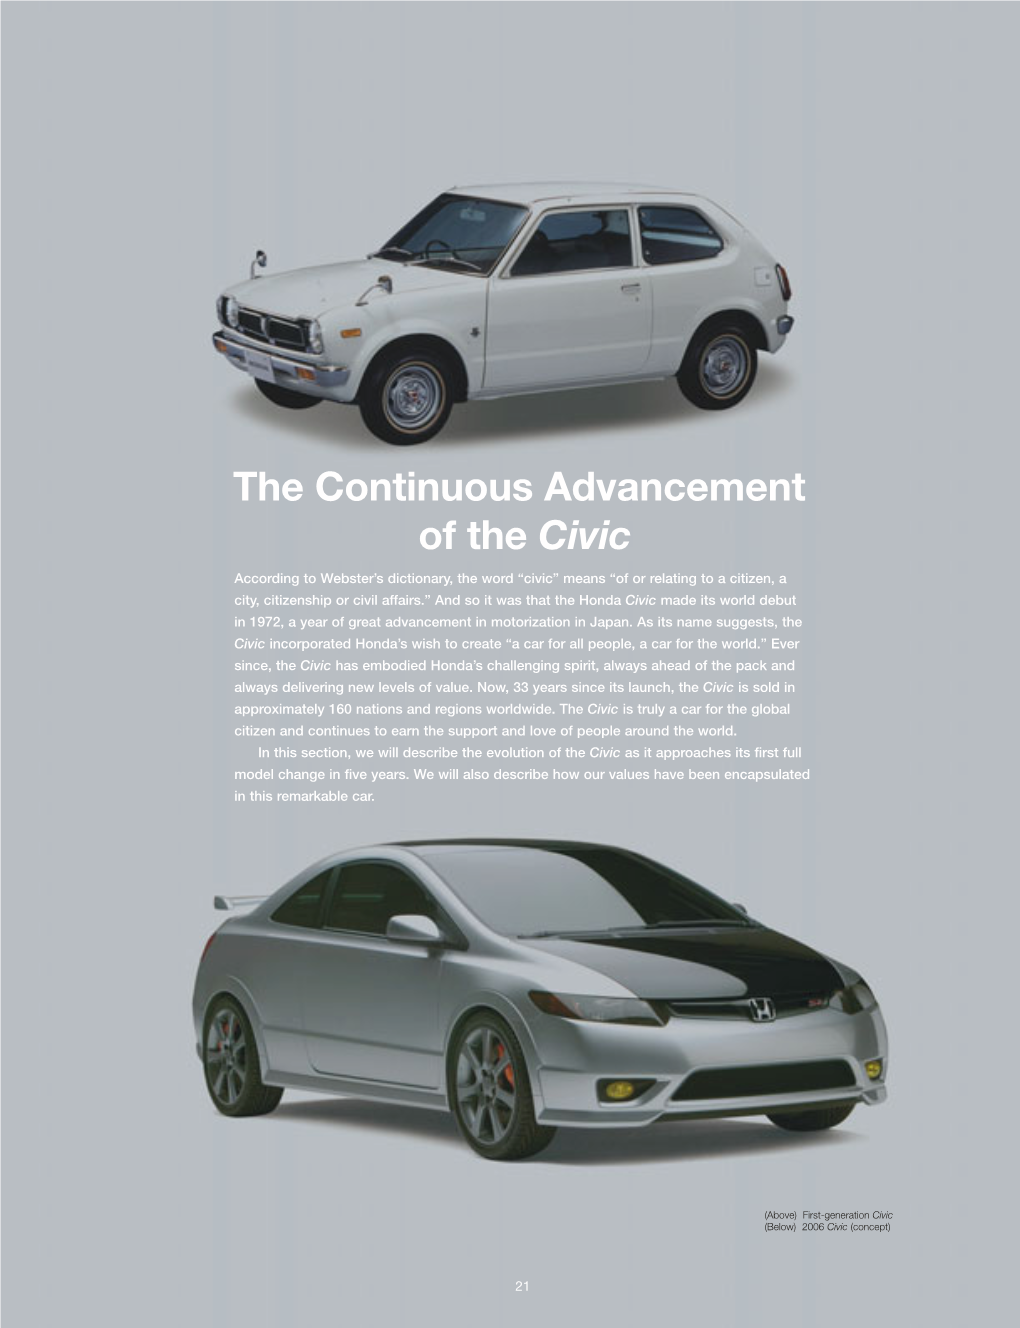 The Continuous Advancement of the Civic